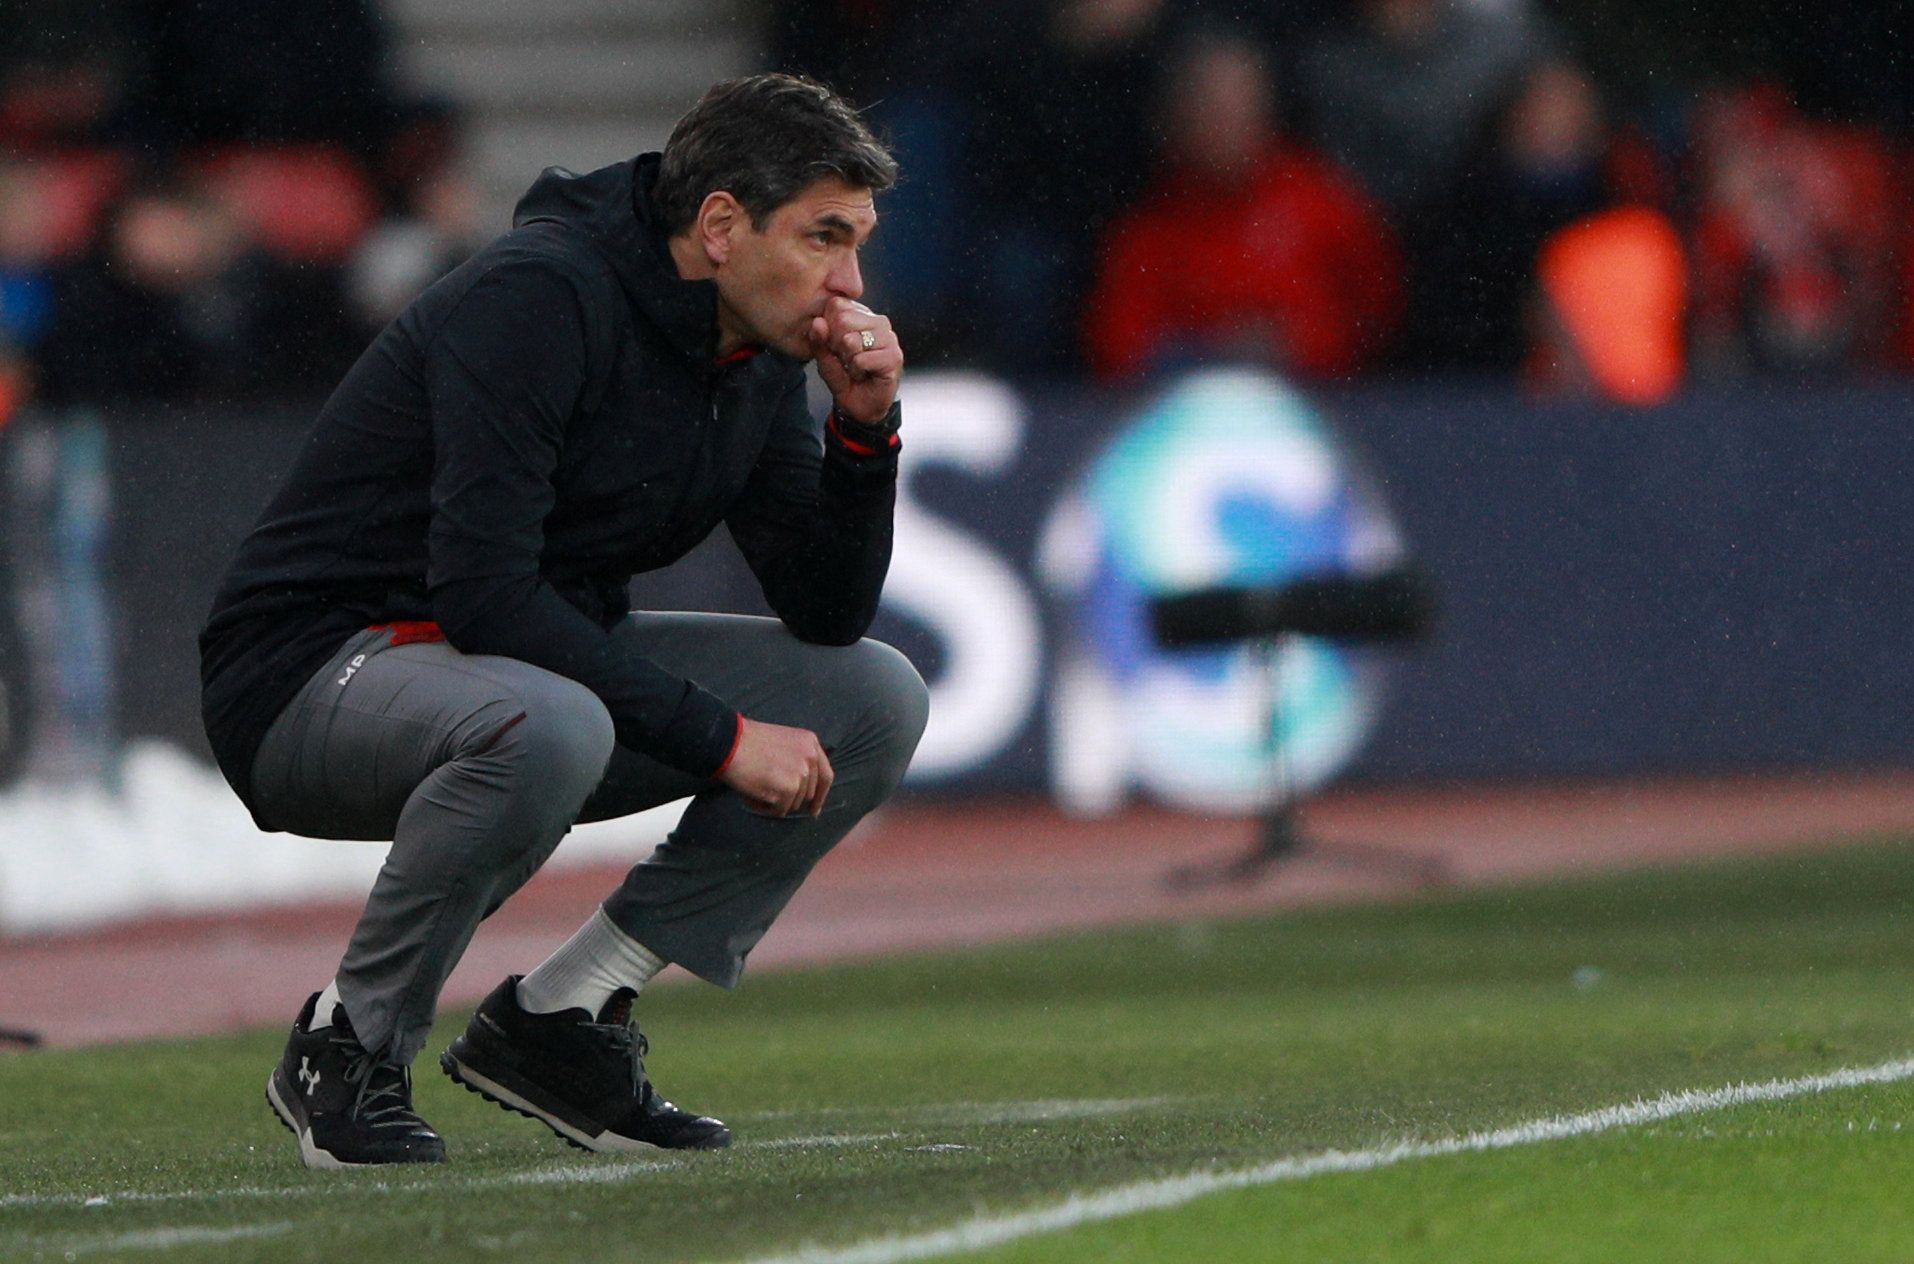 Soccer Football - Premier League - Southampton vs Stoke City - St Mary's Stadium, Southampton, Britain - March 3, 2018   Southampton manager Mauricio Pellegrino looks on   REUTERS/Ian Walton    EDITORIAL USE ONLY. No use with unauthorized audio, video, data, fixture lists, club/league logos or 